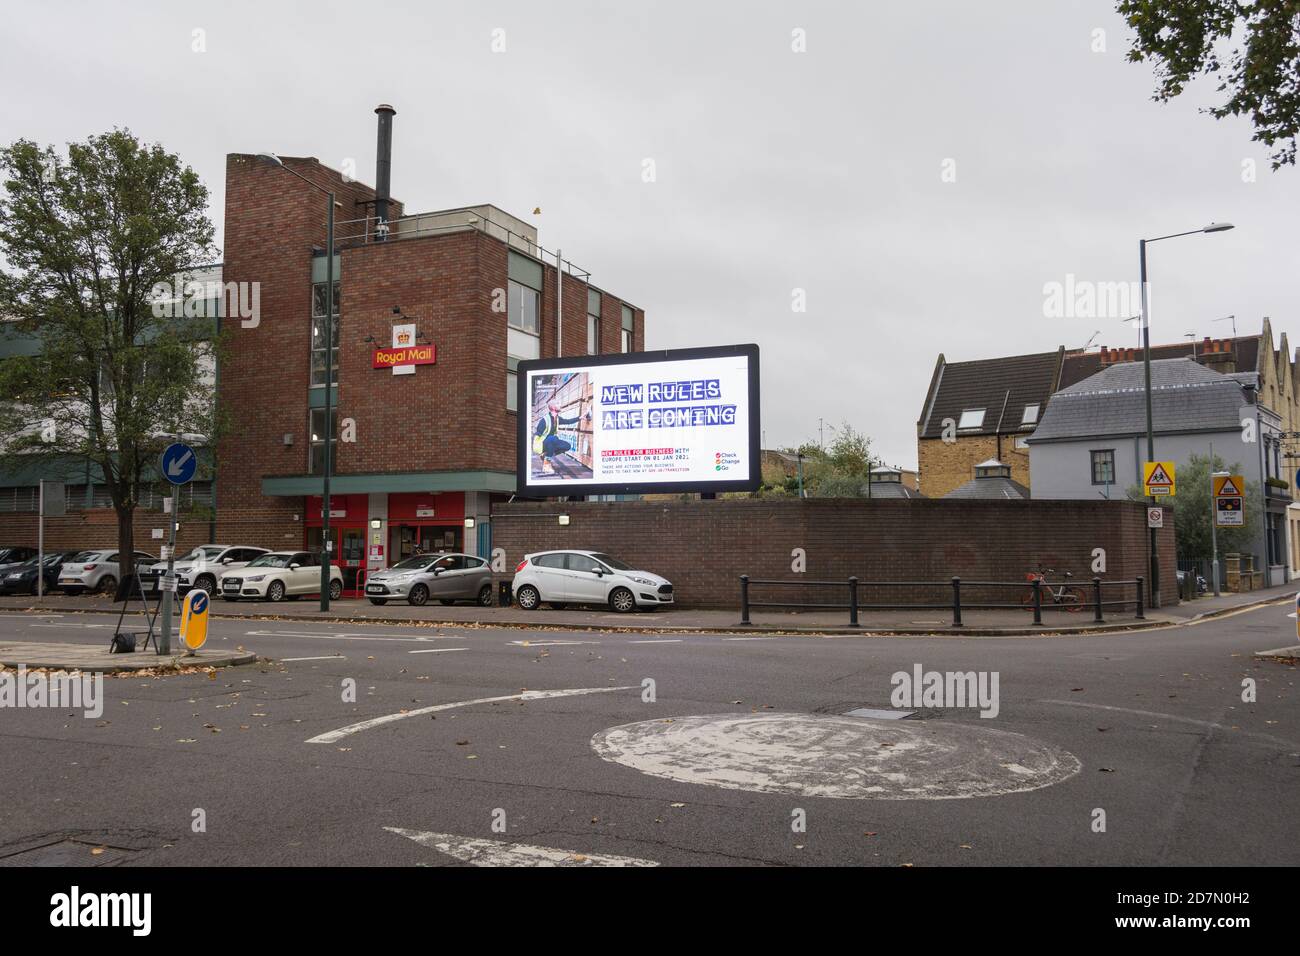 London, England, UK. 24 October 2020.  HM Government, Brexit New Rules are Coming electronic billboard advert © Benjamin John Stock Photo